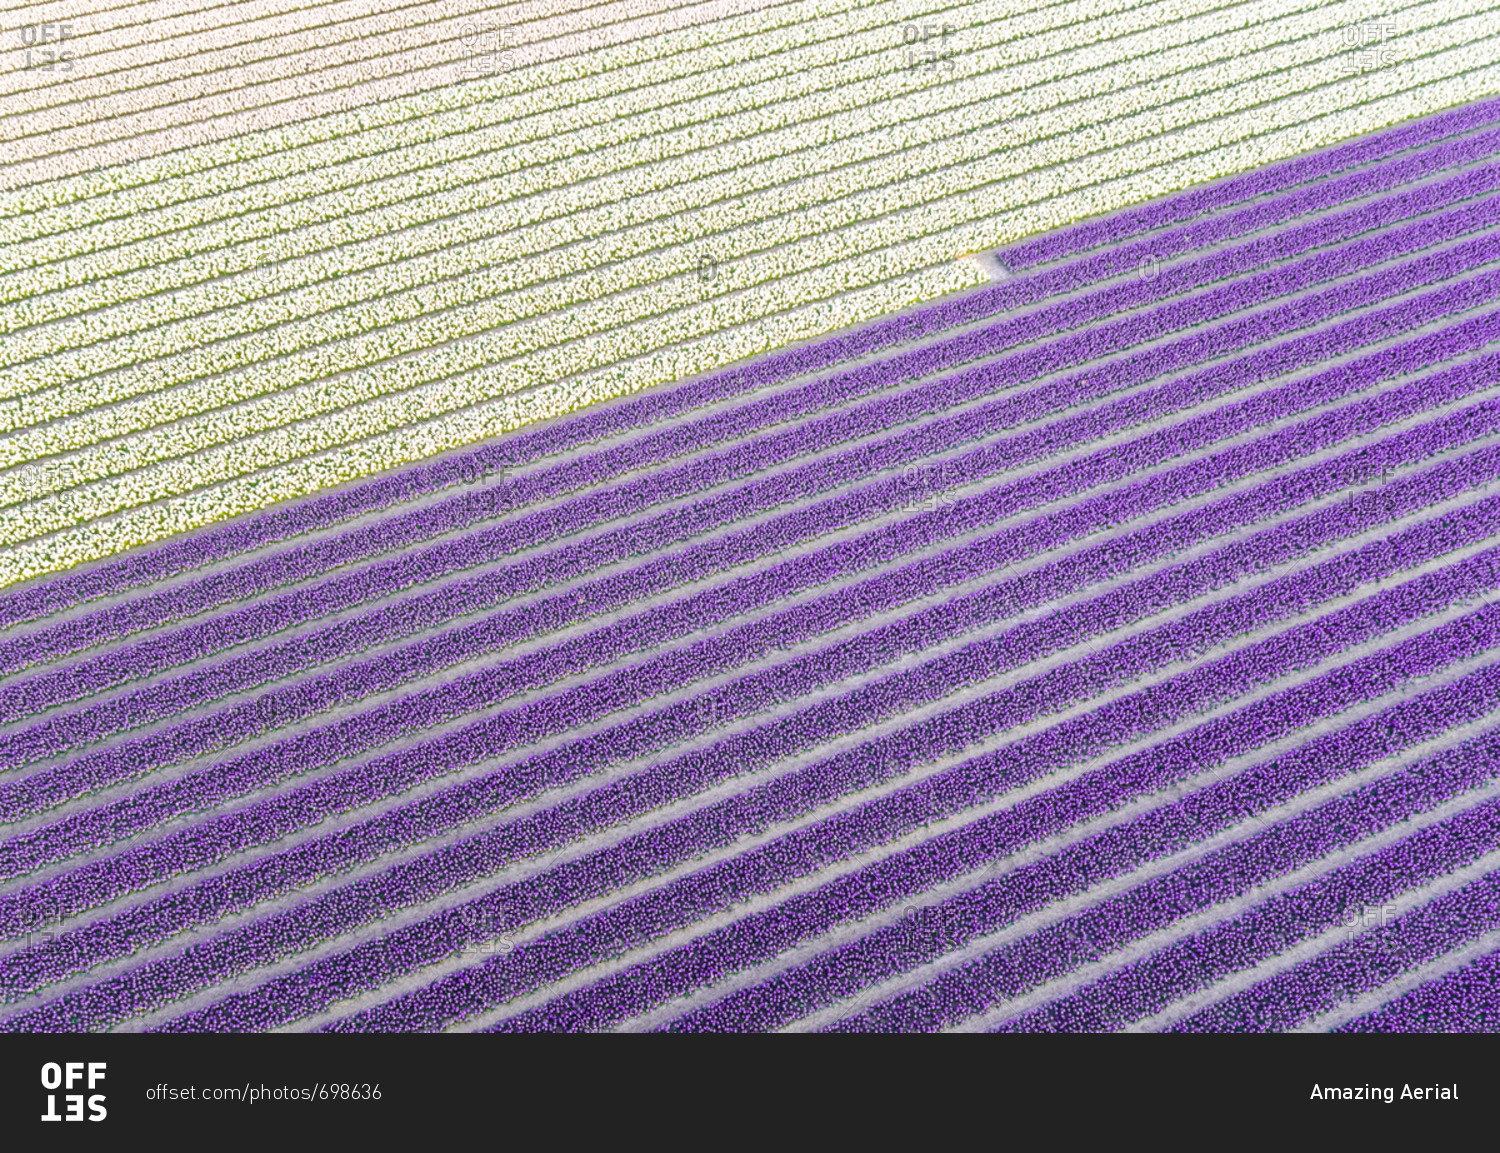 Aerial view of white and purple rows of tulips at Keukenhof botanical garden in Lisse, Netherlands